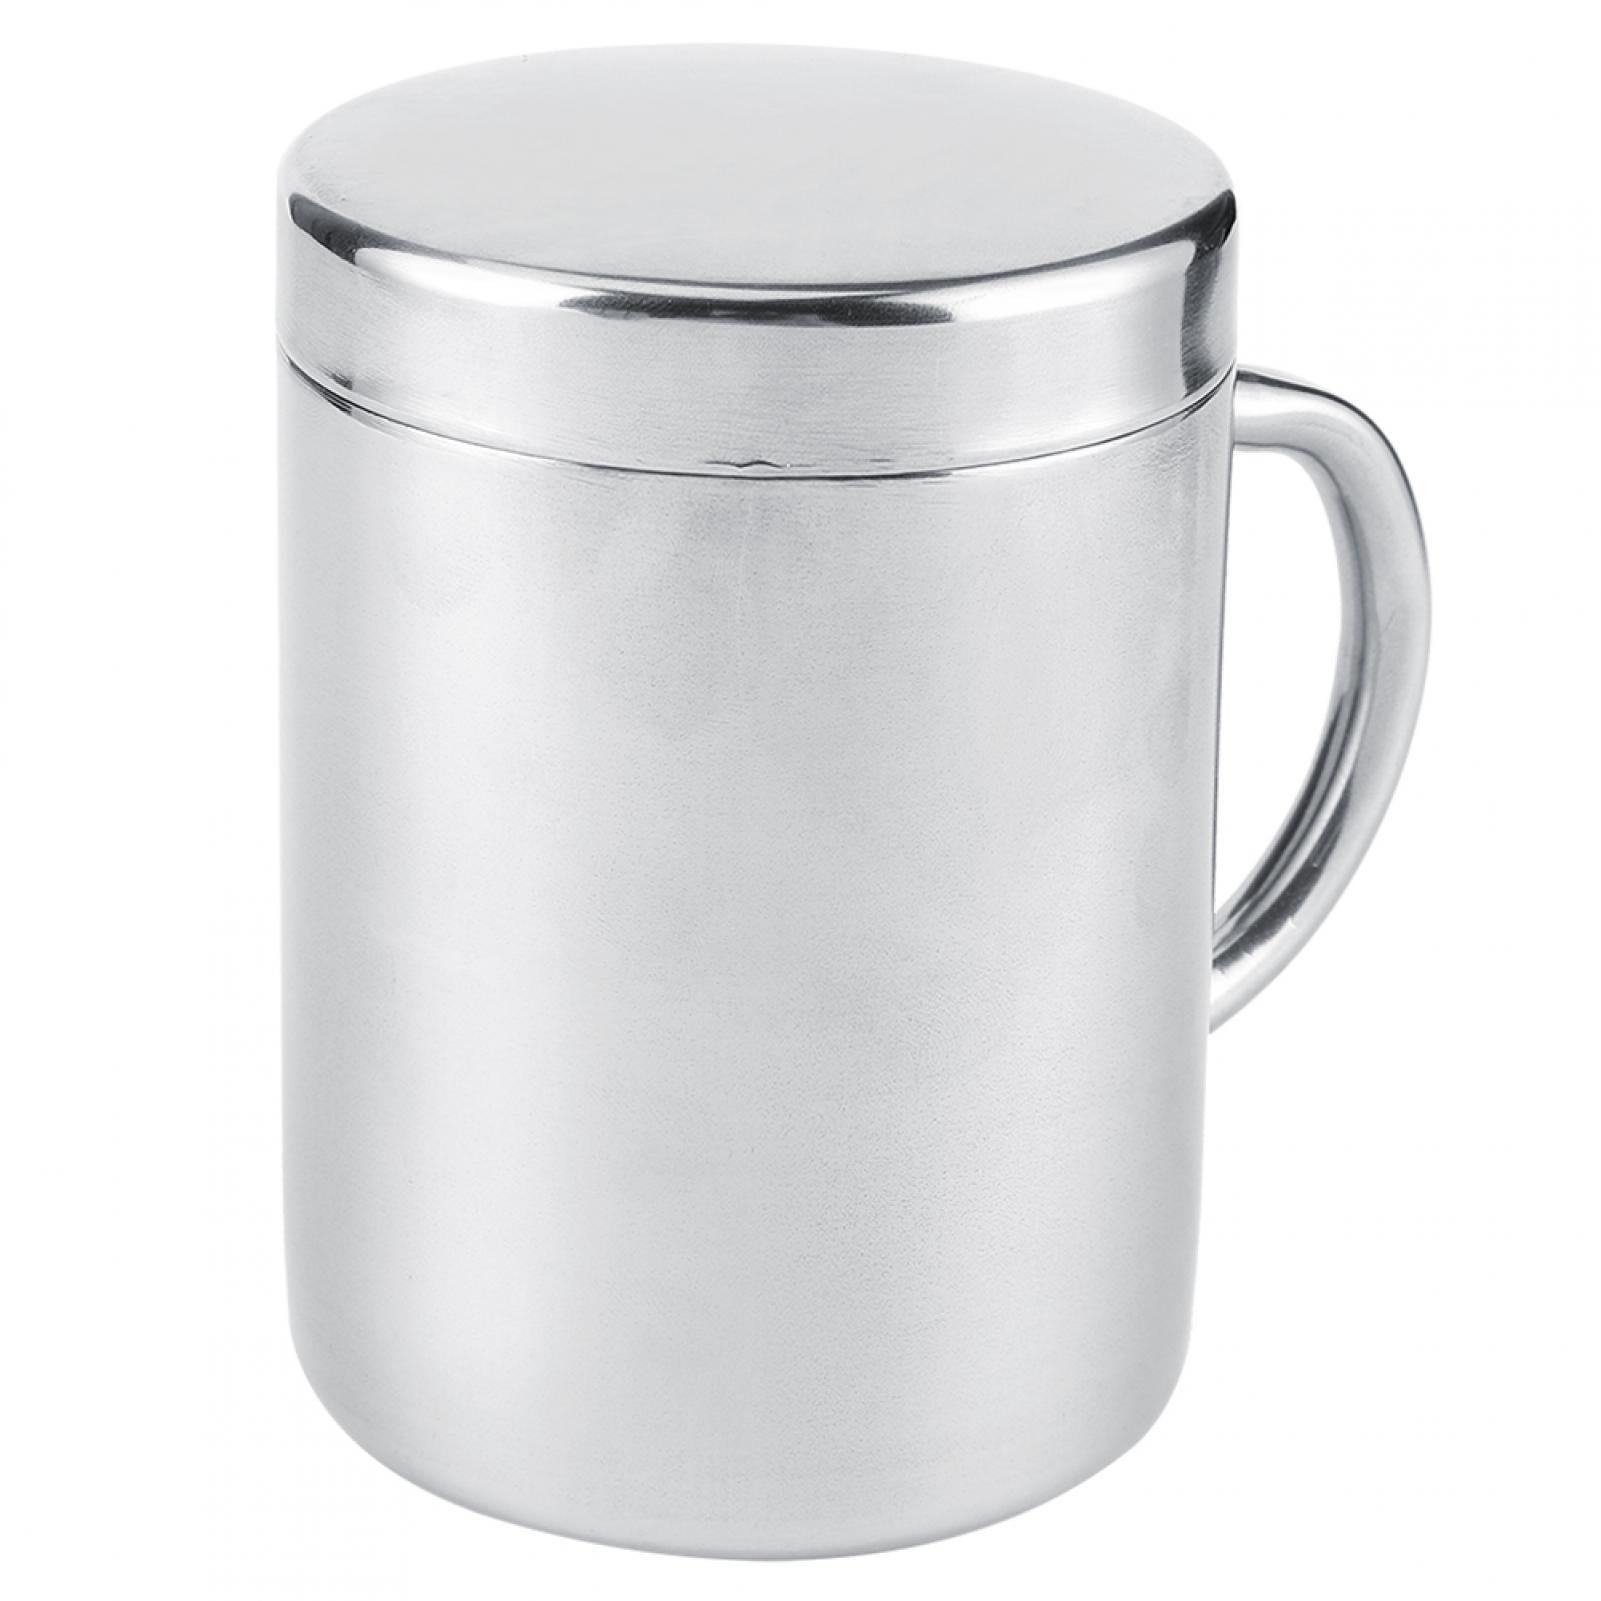 Details about   Stainless Steel Mug Cup Double Wall Portable Travel Tumbler Coffee Tea Cups Home 